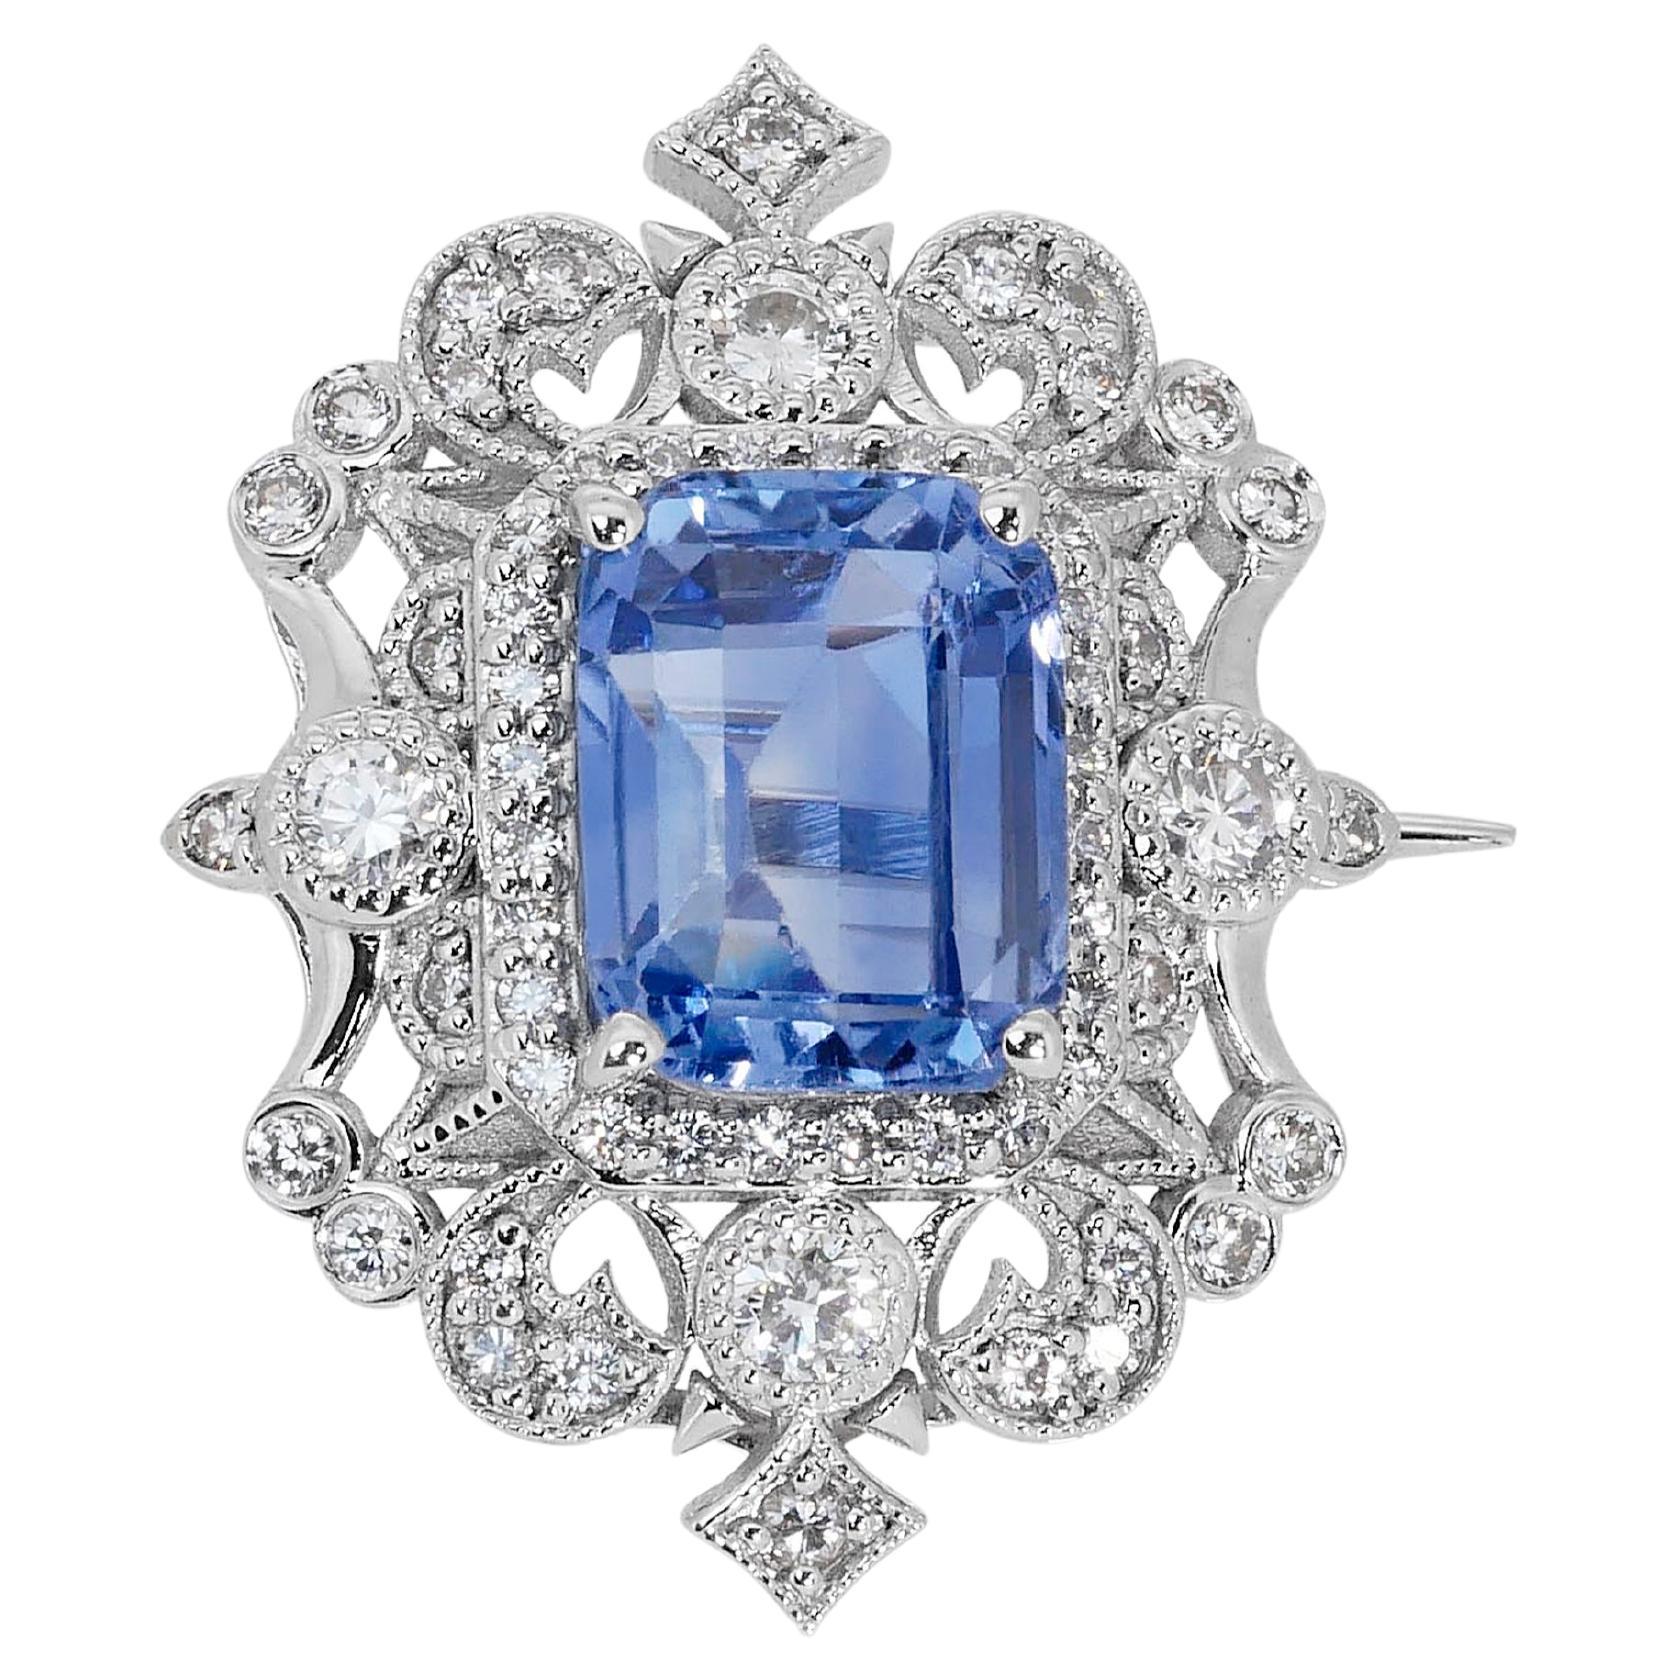 Beautiful 18K White gold Brooch w/ 5.79 ct total natural sapphire and diamonds